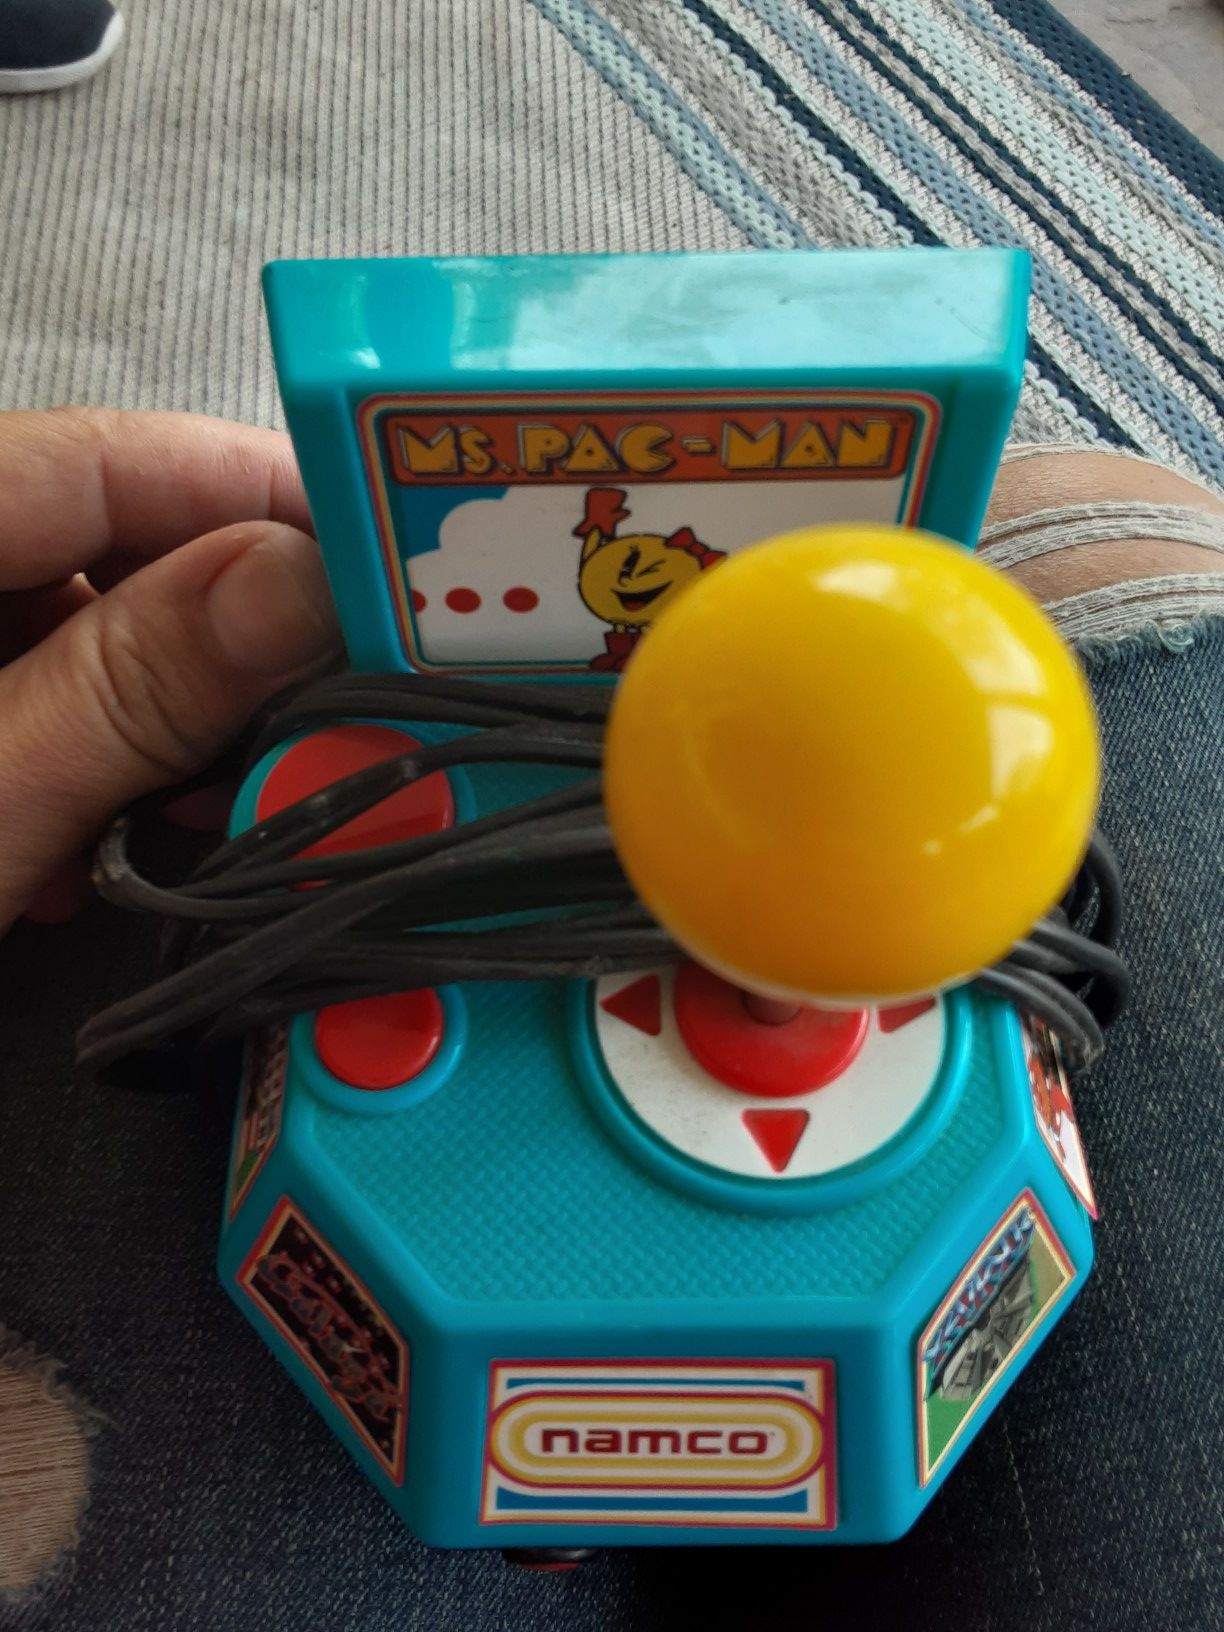 TV PacMan plug- in game